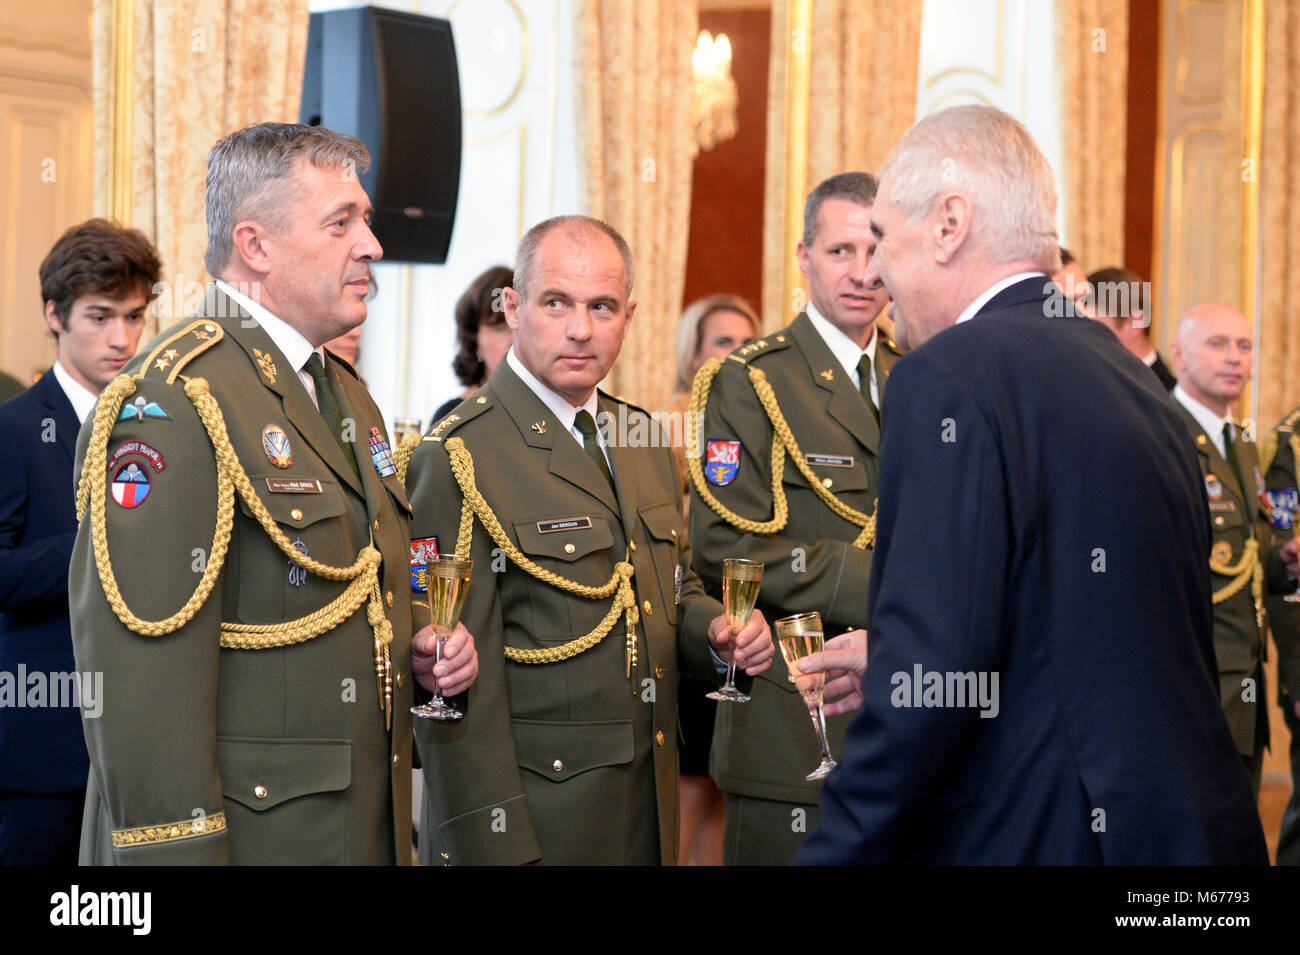 ***FILE PHOTO*** Ales Opata (left) will be the new Czech chief-of-staff as of May 1, 2018, Defence Minister Karla Slechtova (for ANO) announced on Thursday, March 1, 2018, adding that she will propose the dismissal of the current chief-of-staff, Josef Becvar, to the cabinet meeting next Thursday. On the right side of the photo is seen Czech President Milos Zeman, during the appointment of new generals on the occasion of the national holiday at the Prague Castle. (CTK Photo/Katerina Sulova) Stock Photo